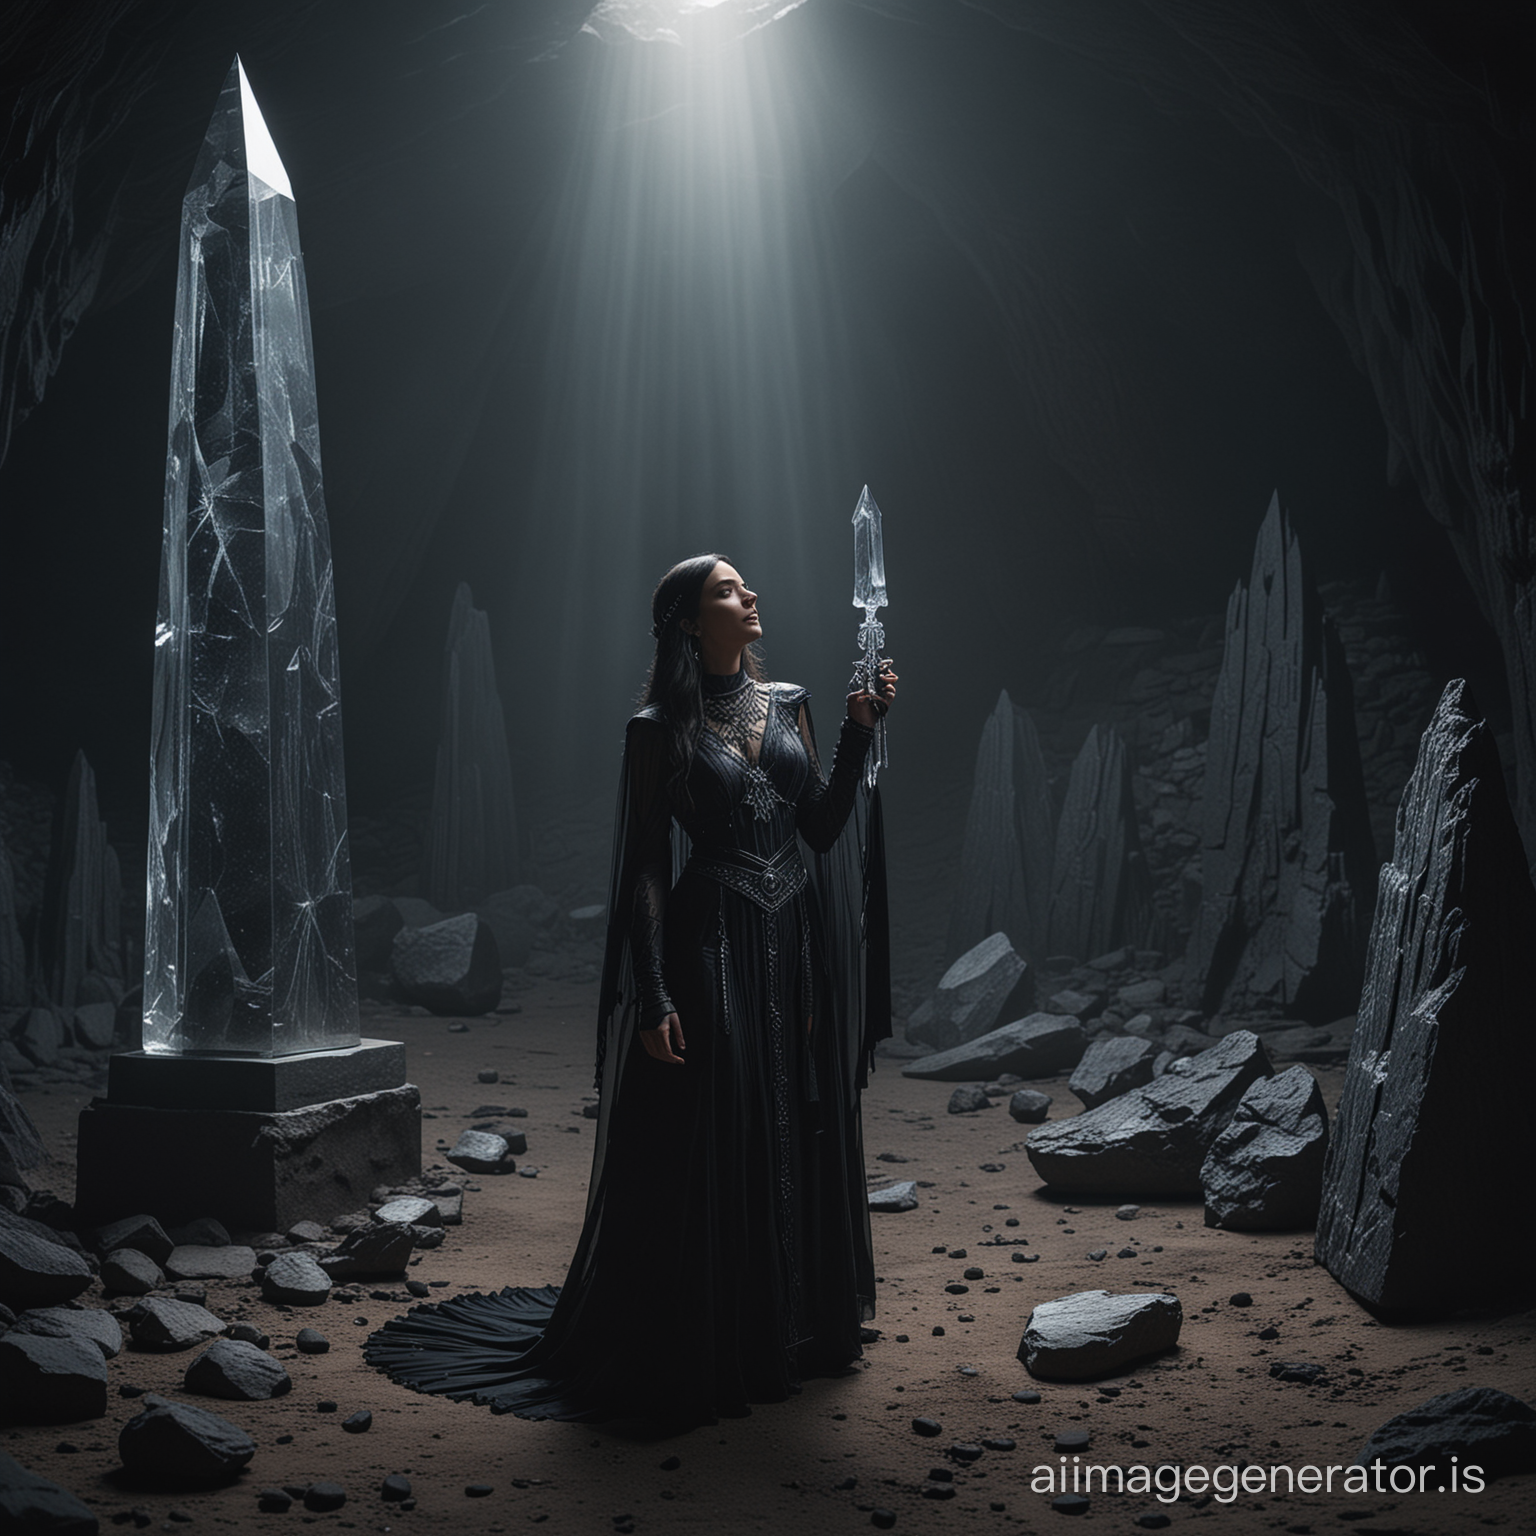 A beautiful woman dressed in an outfit based on a raven performing a ritual next to a large crystal obelisk in a dark cave